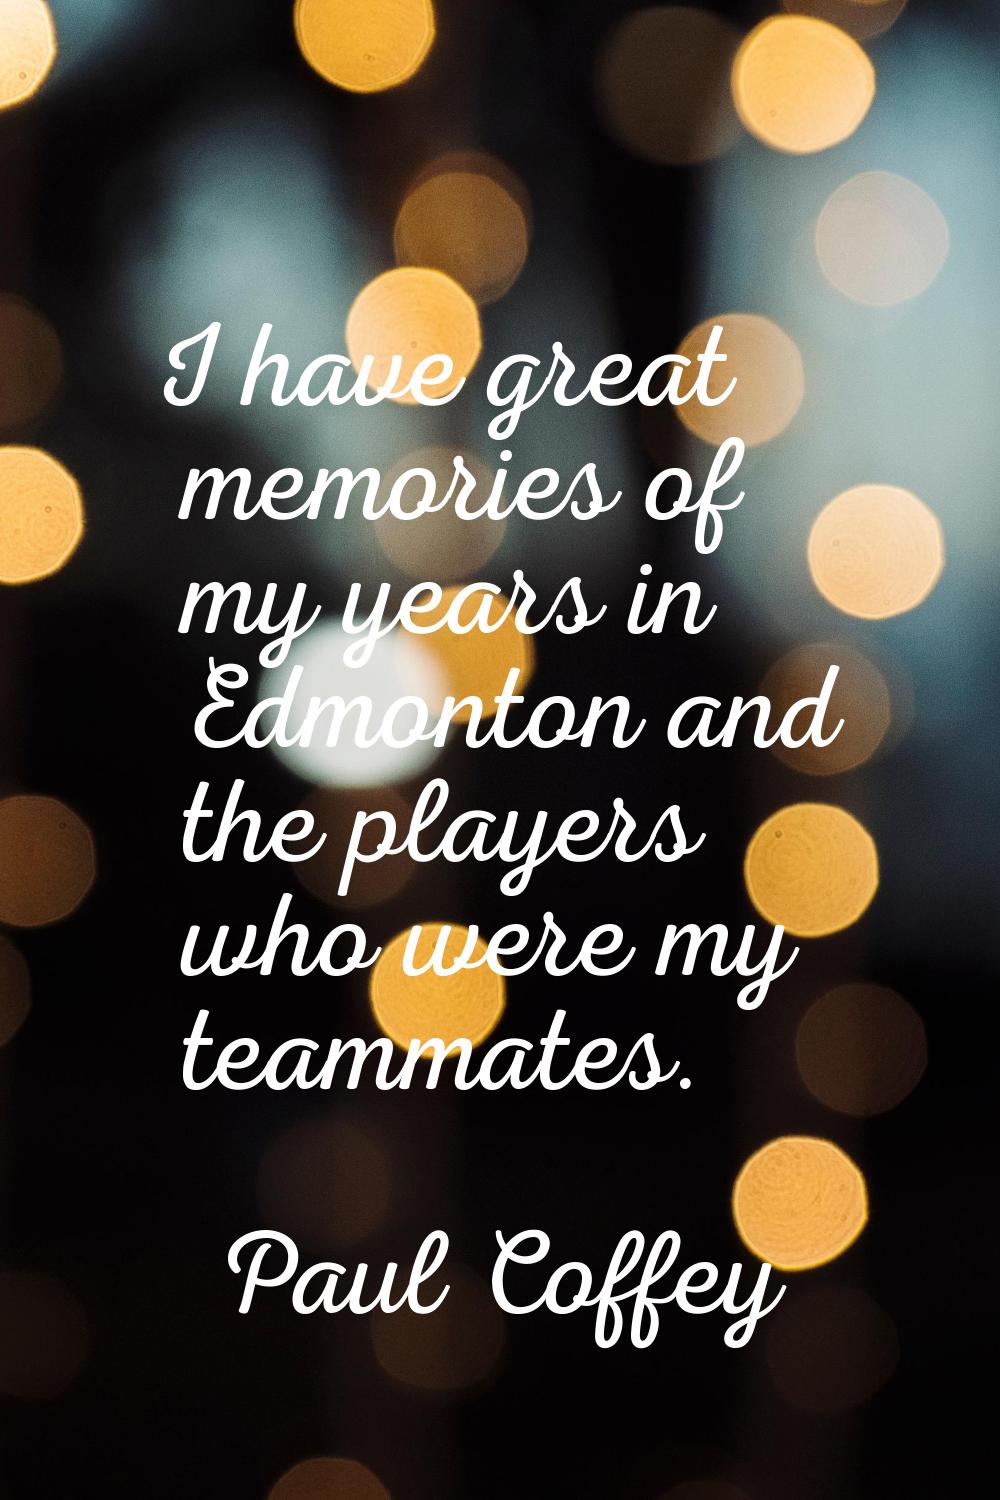 I have great memories of my years in Edmonton and the players who were my teammates.